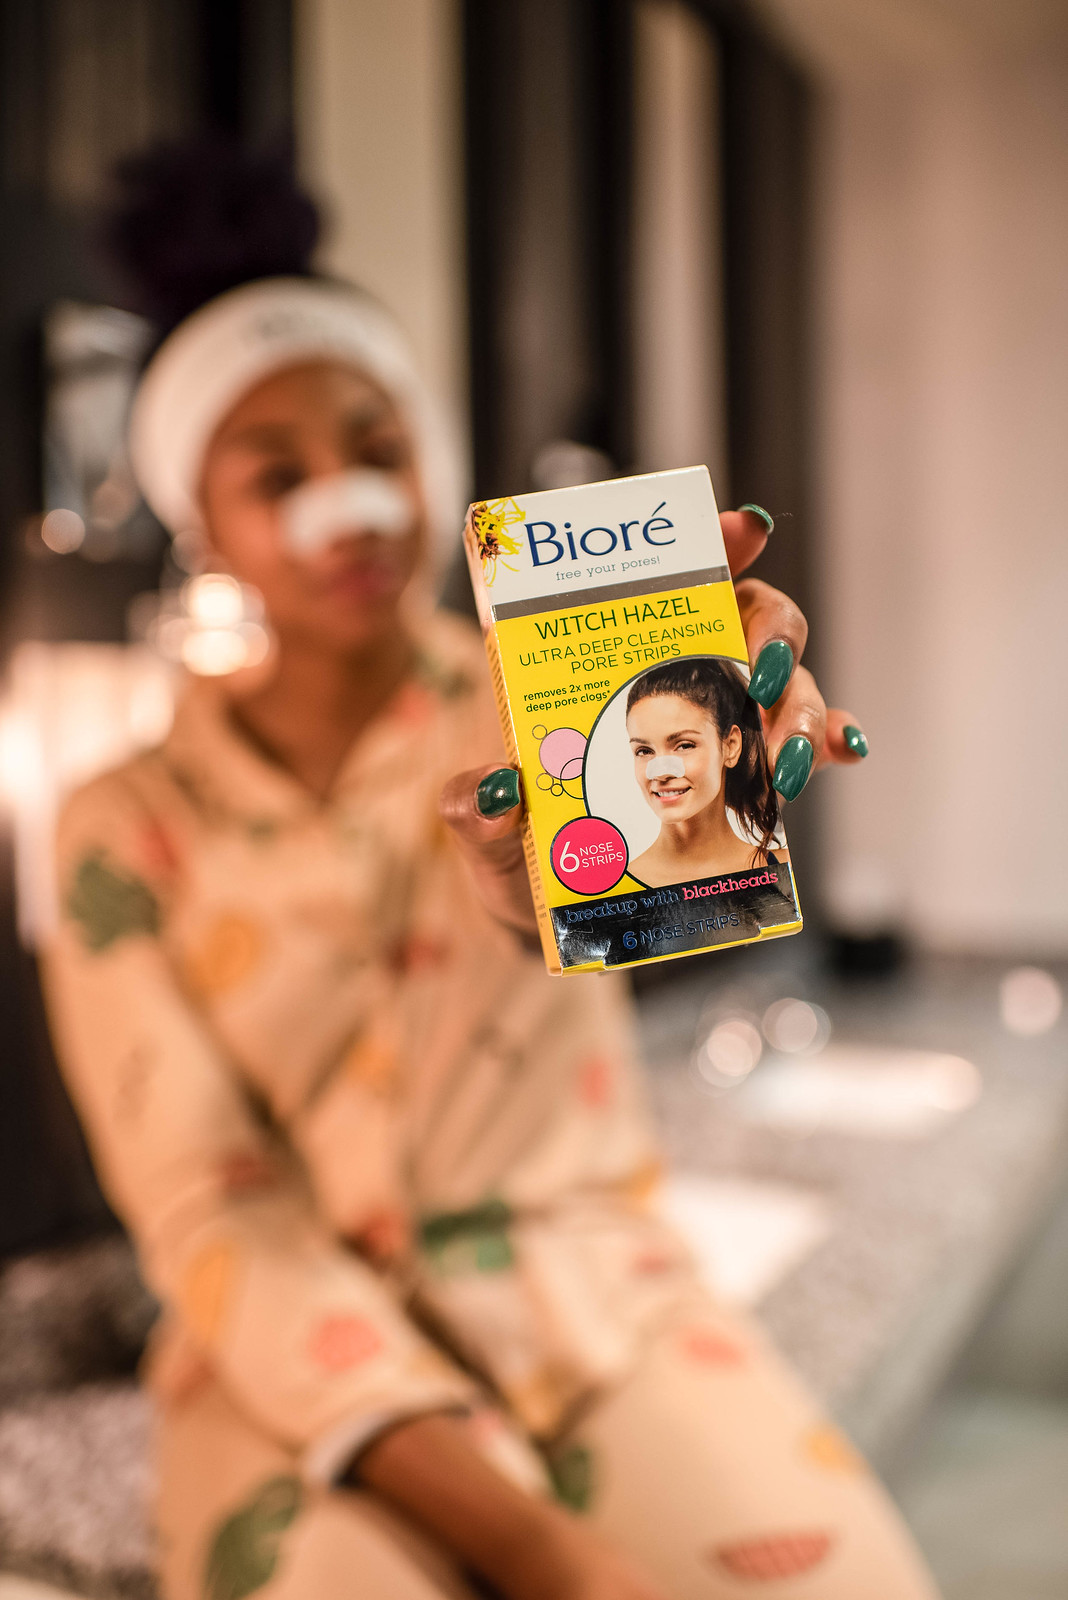 biore witch hazel ultra deep cleaning pore strips review